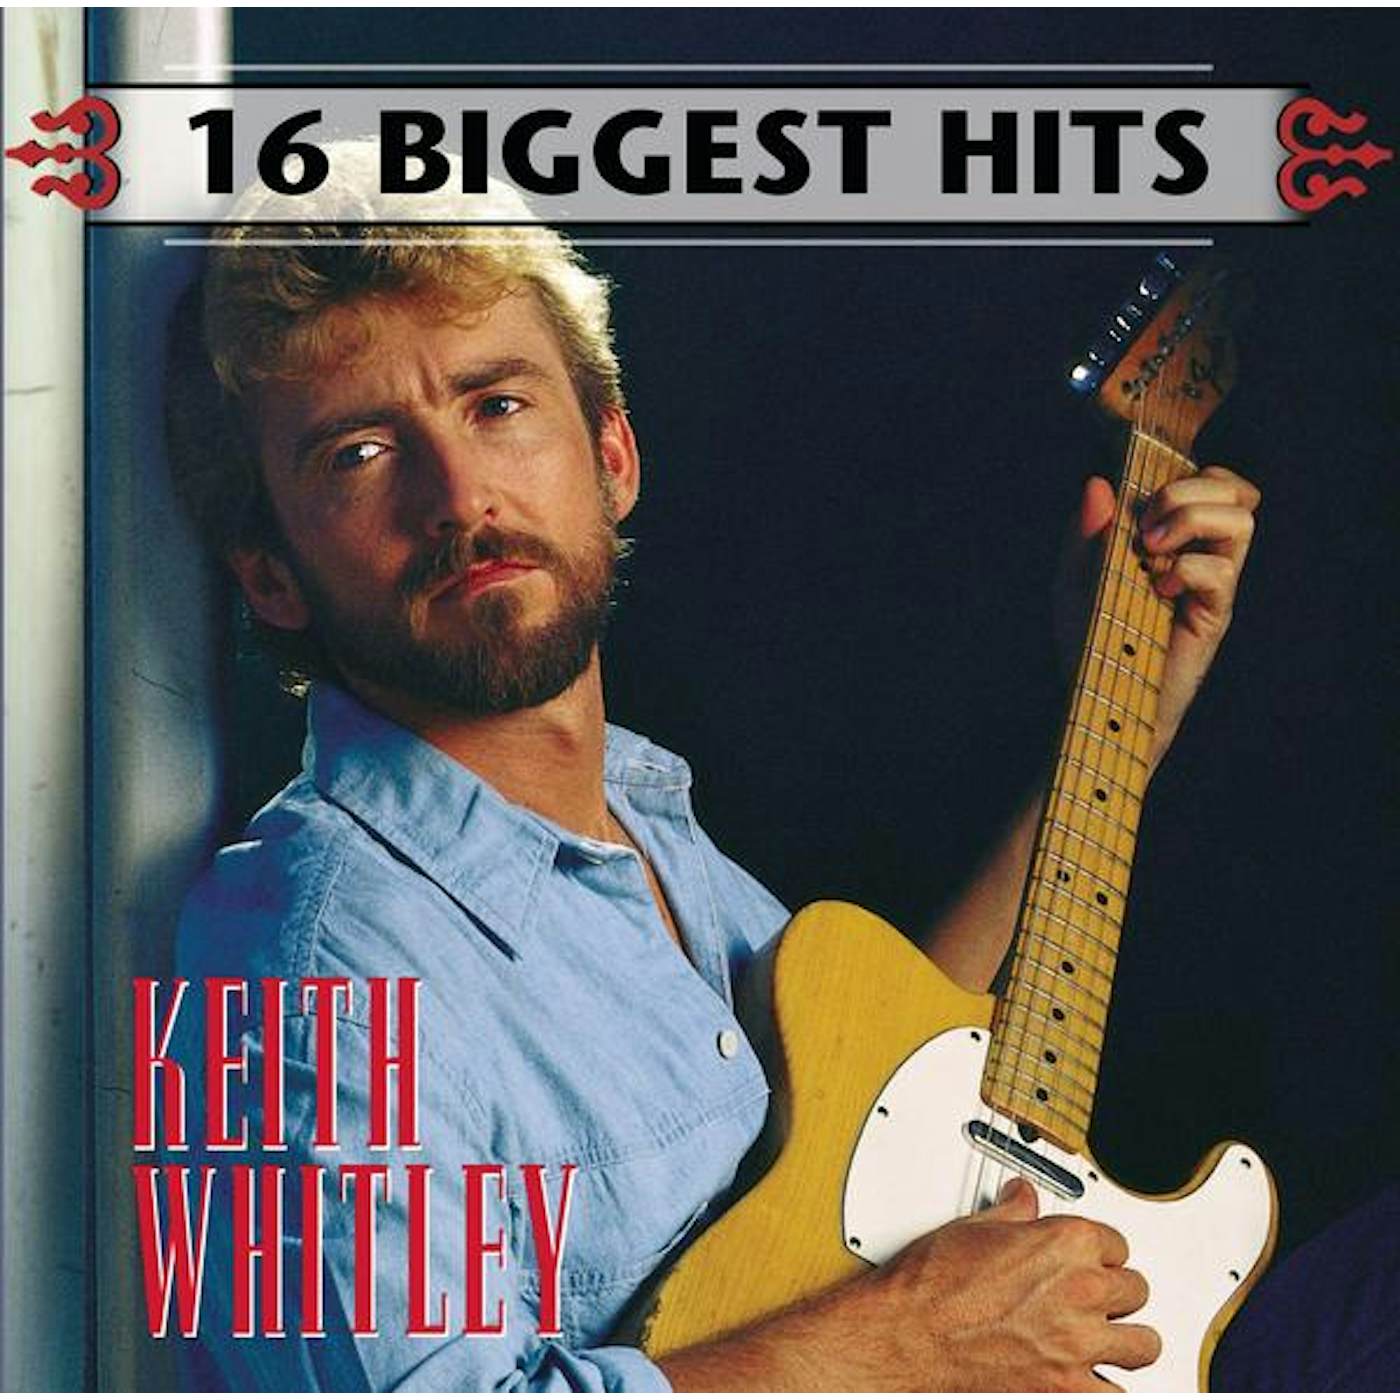 Keith Whitley 16 BIGGEST HITS CD